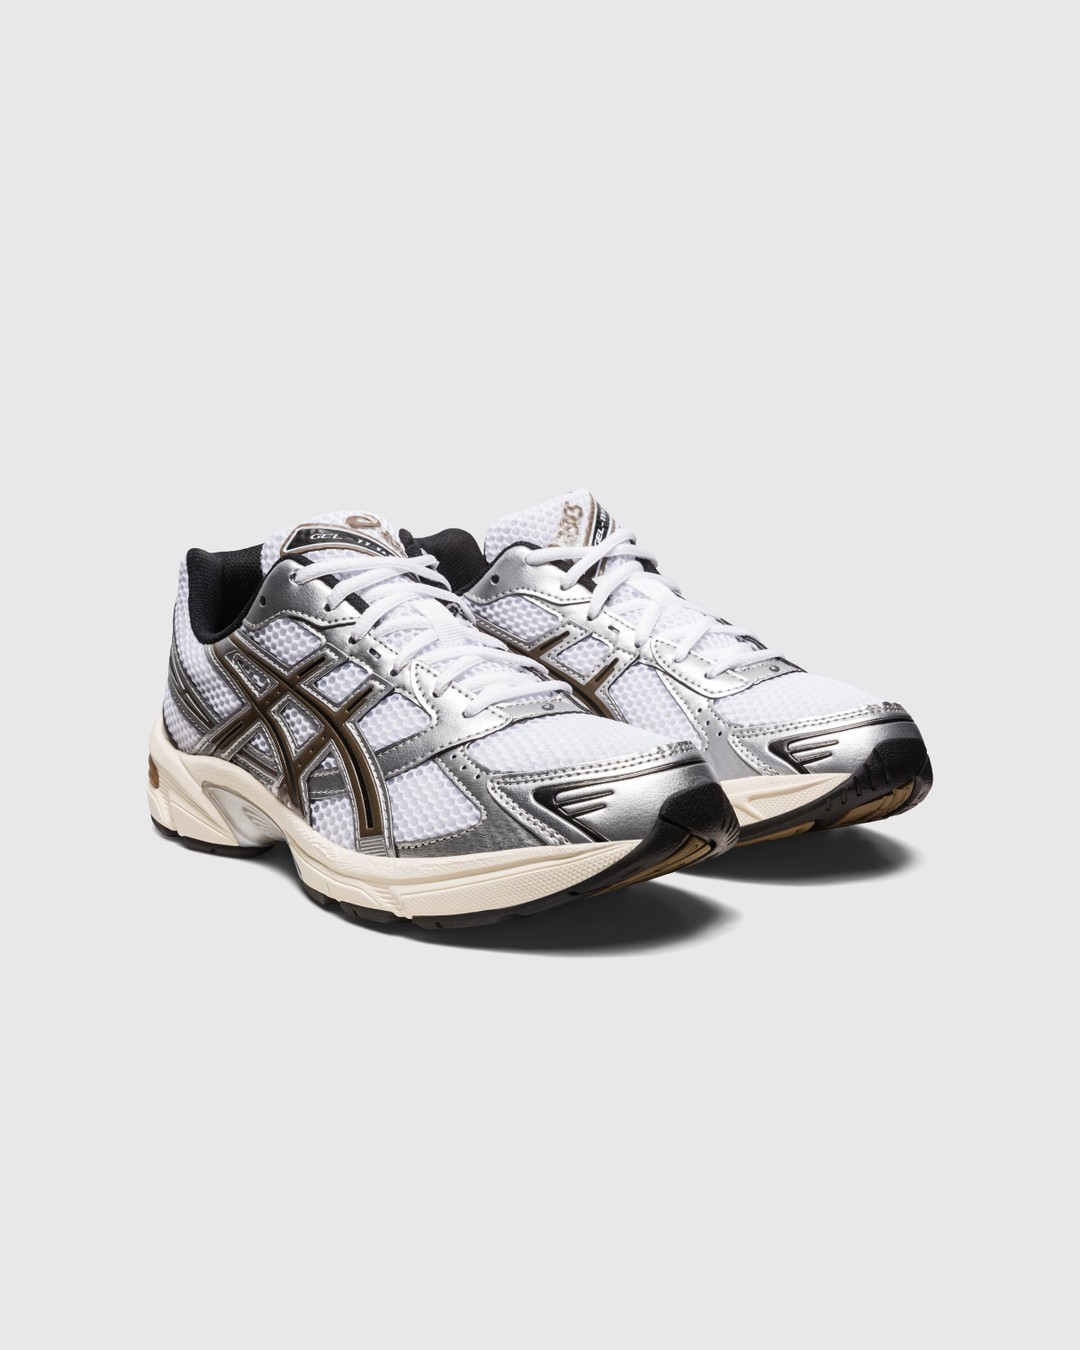 asics – GEL-1130 White/Clay Canyon - Sneakers - White - Image 3